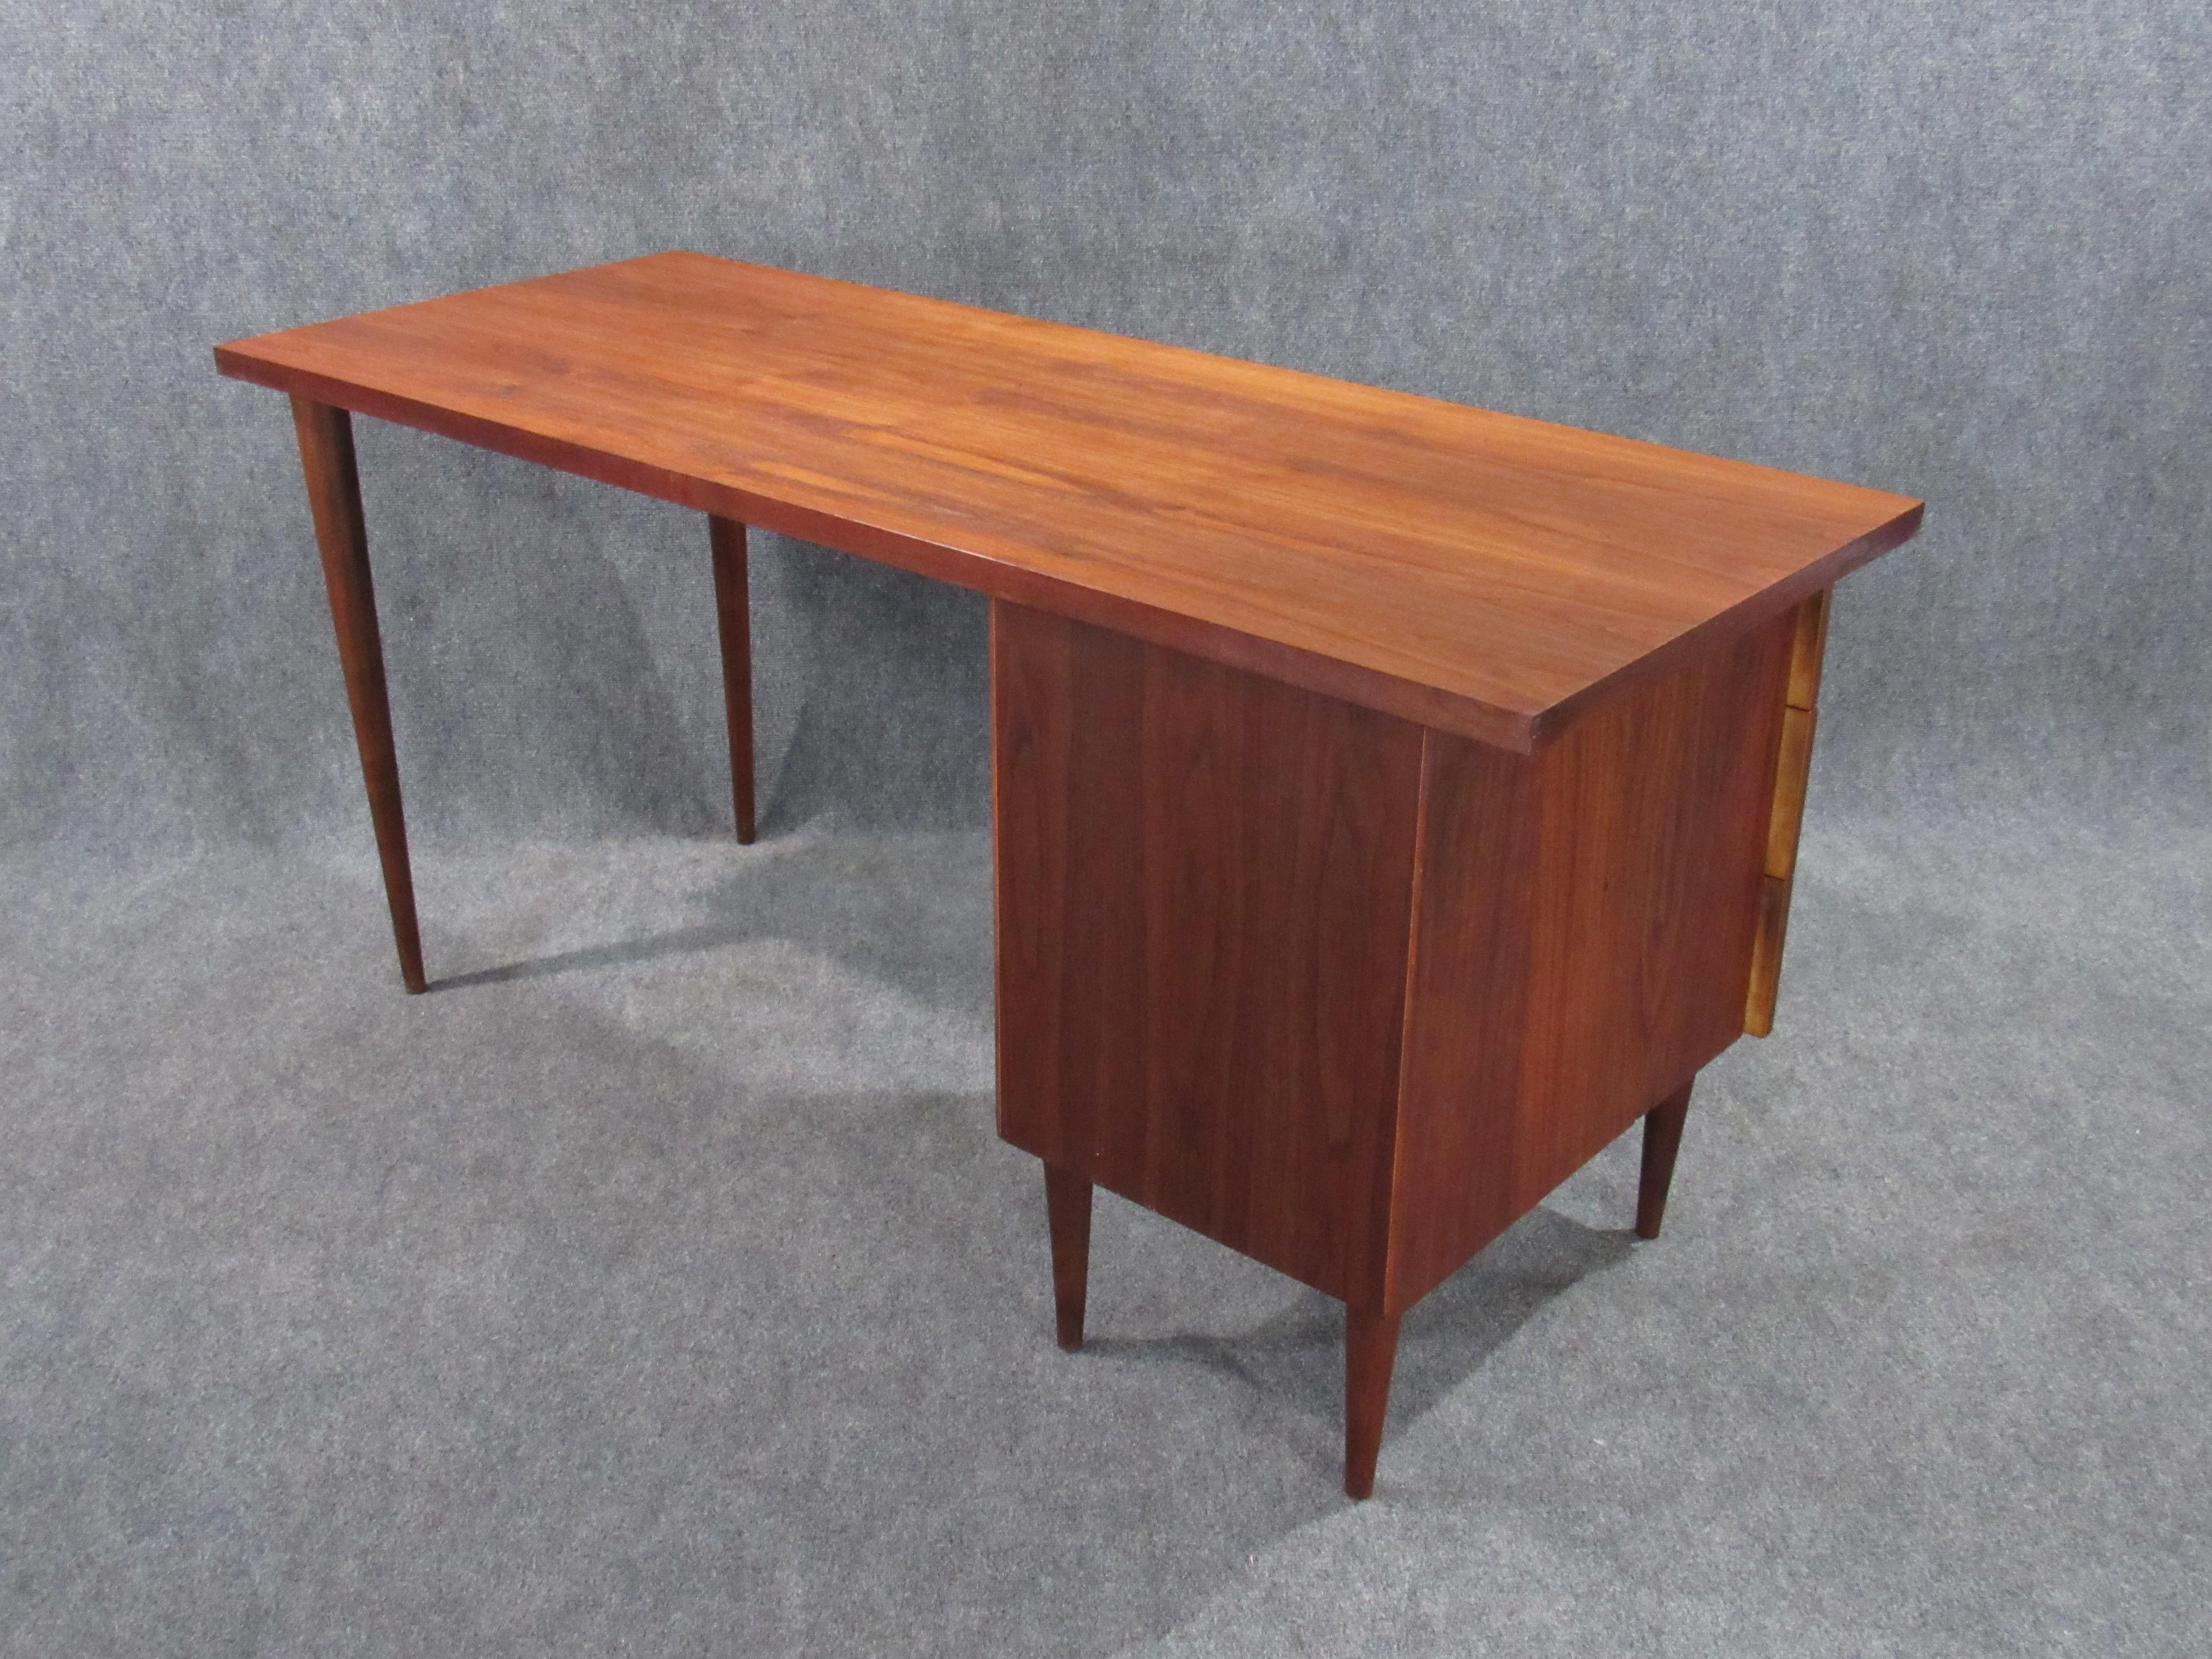 Late 20th Century Mid-Century Modern Walnut Small Desk by Ben Thompson for Design Research